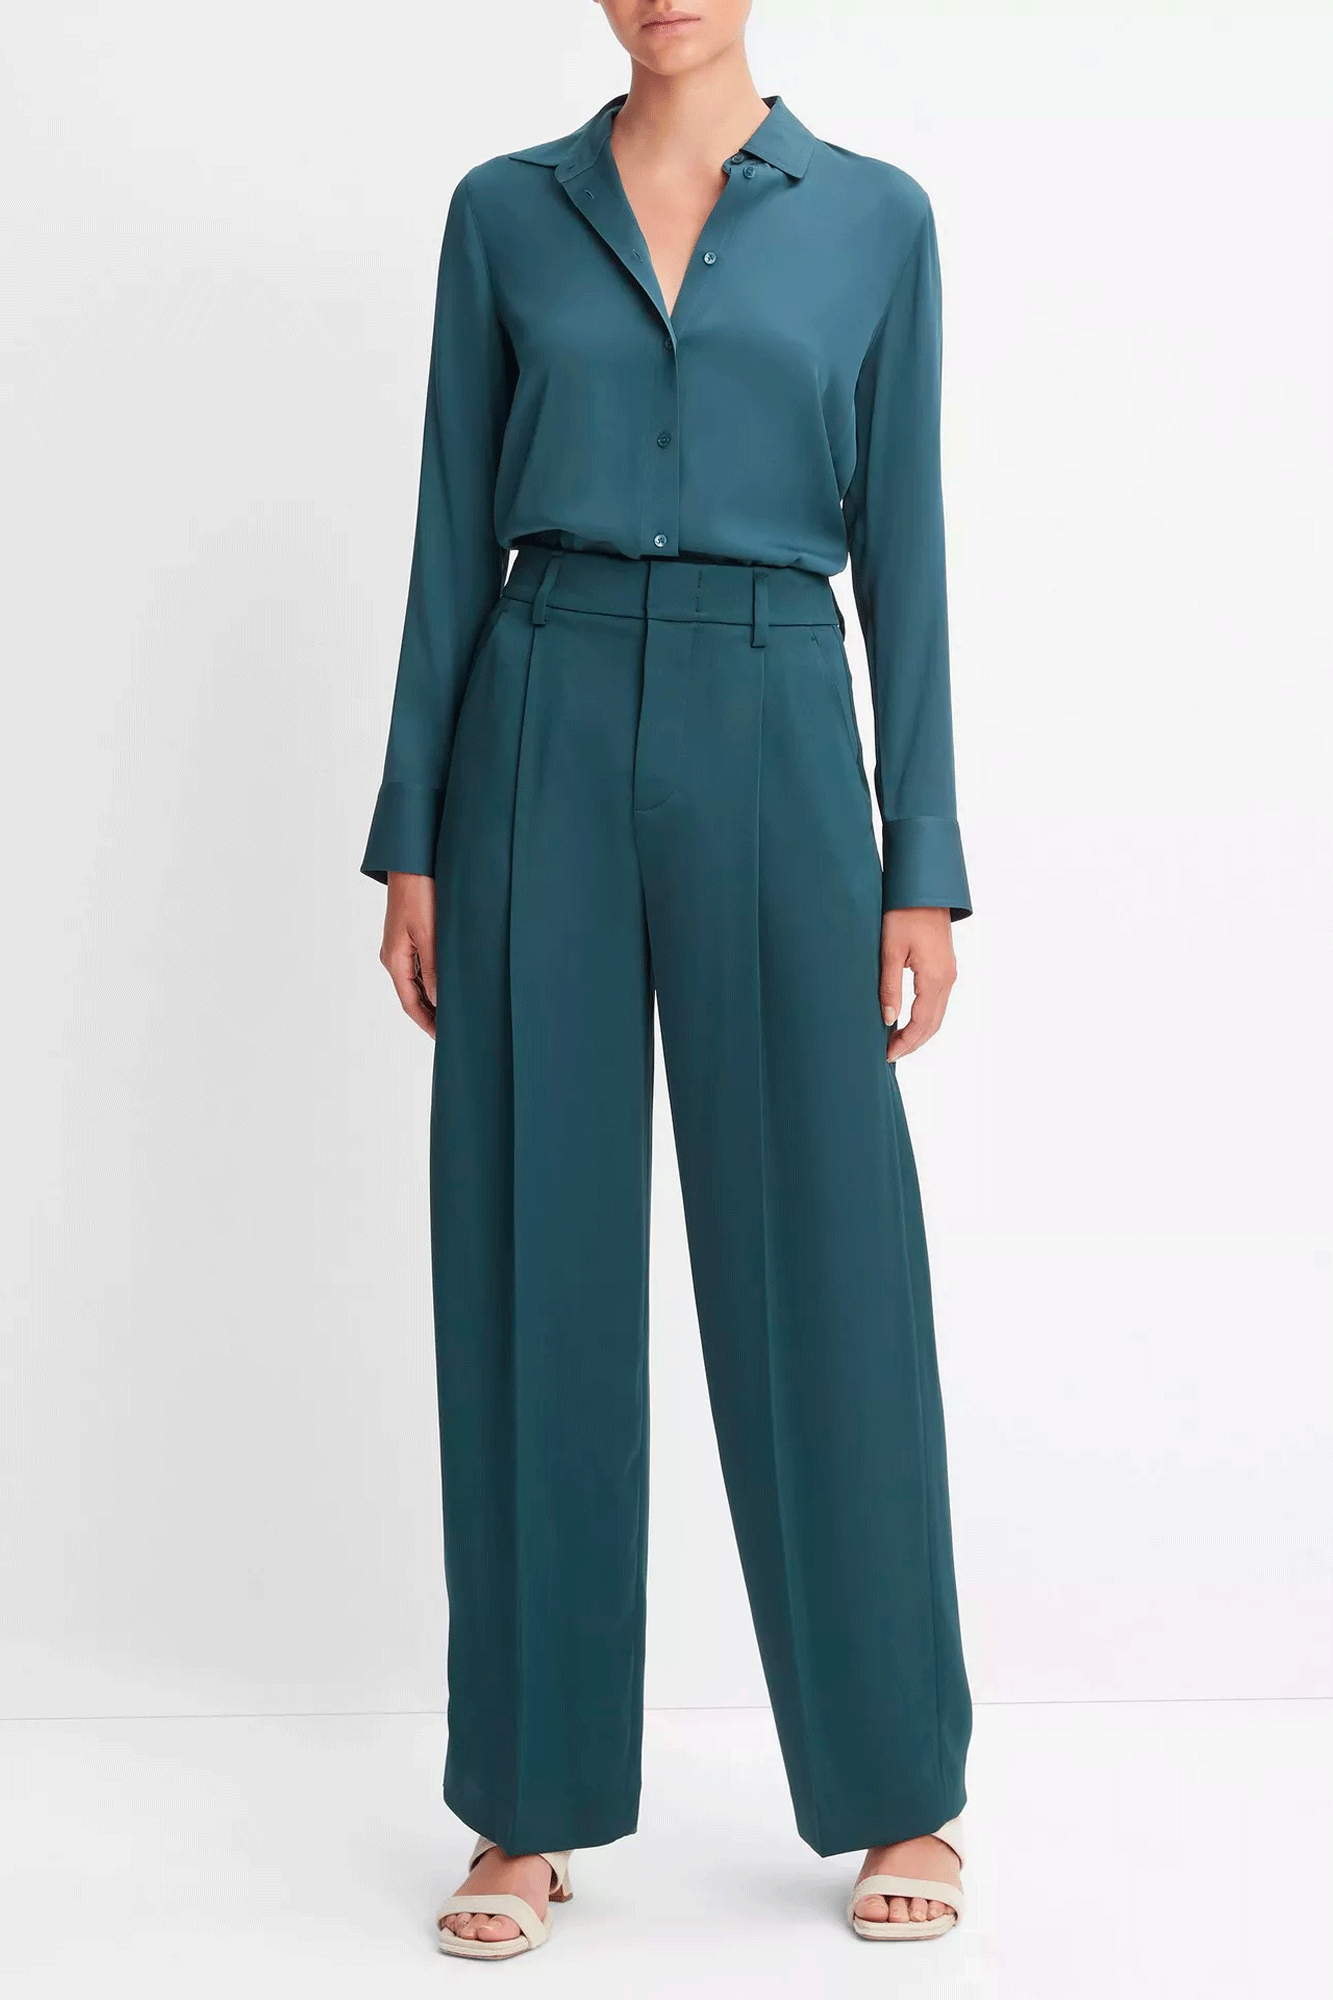 Combine a classic, masculine silhouette with a timeless, luxurious fabric with these Satin Wide Leg trousers from Vince. Crafted from sumptuous satin, these trousers feature a slim, natural waist, and a single-pleated, wide leg for an effortless flow. Perfect for any formal or semi-formal occasion.